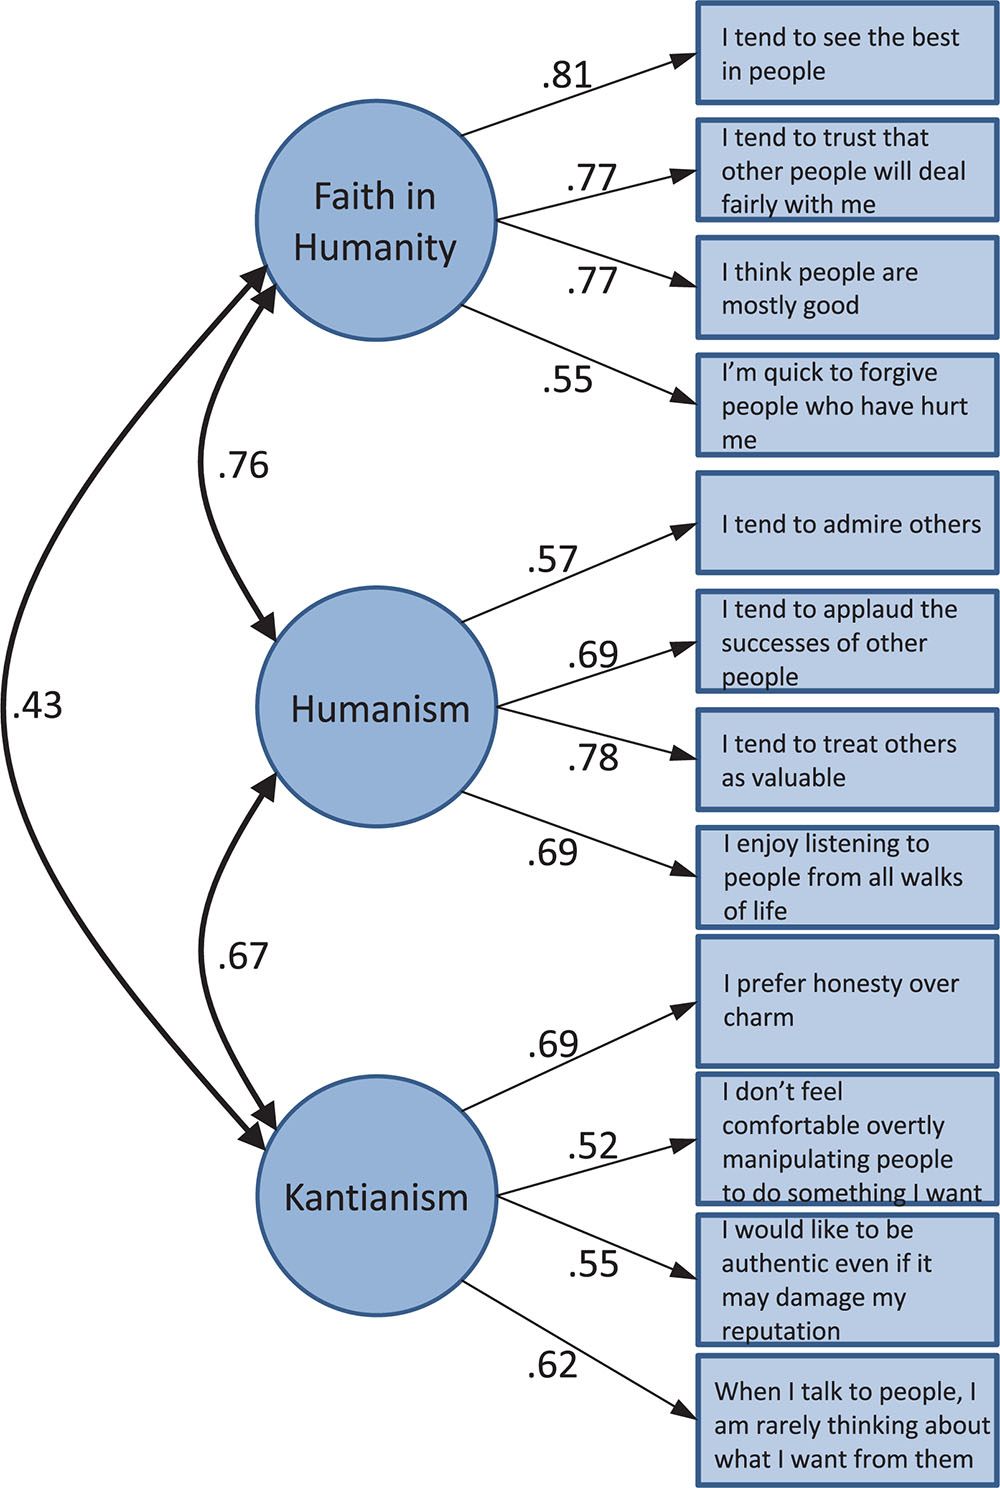 Frontiers | Light vs. Dark Triad of Contrasting Two Different Profiles of Human